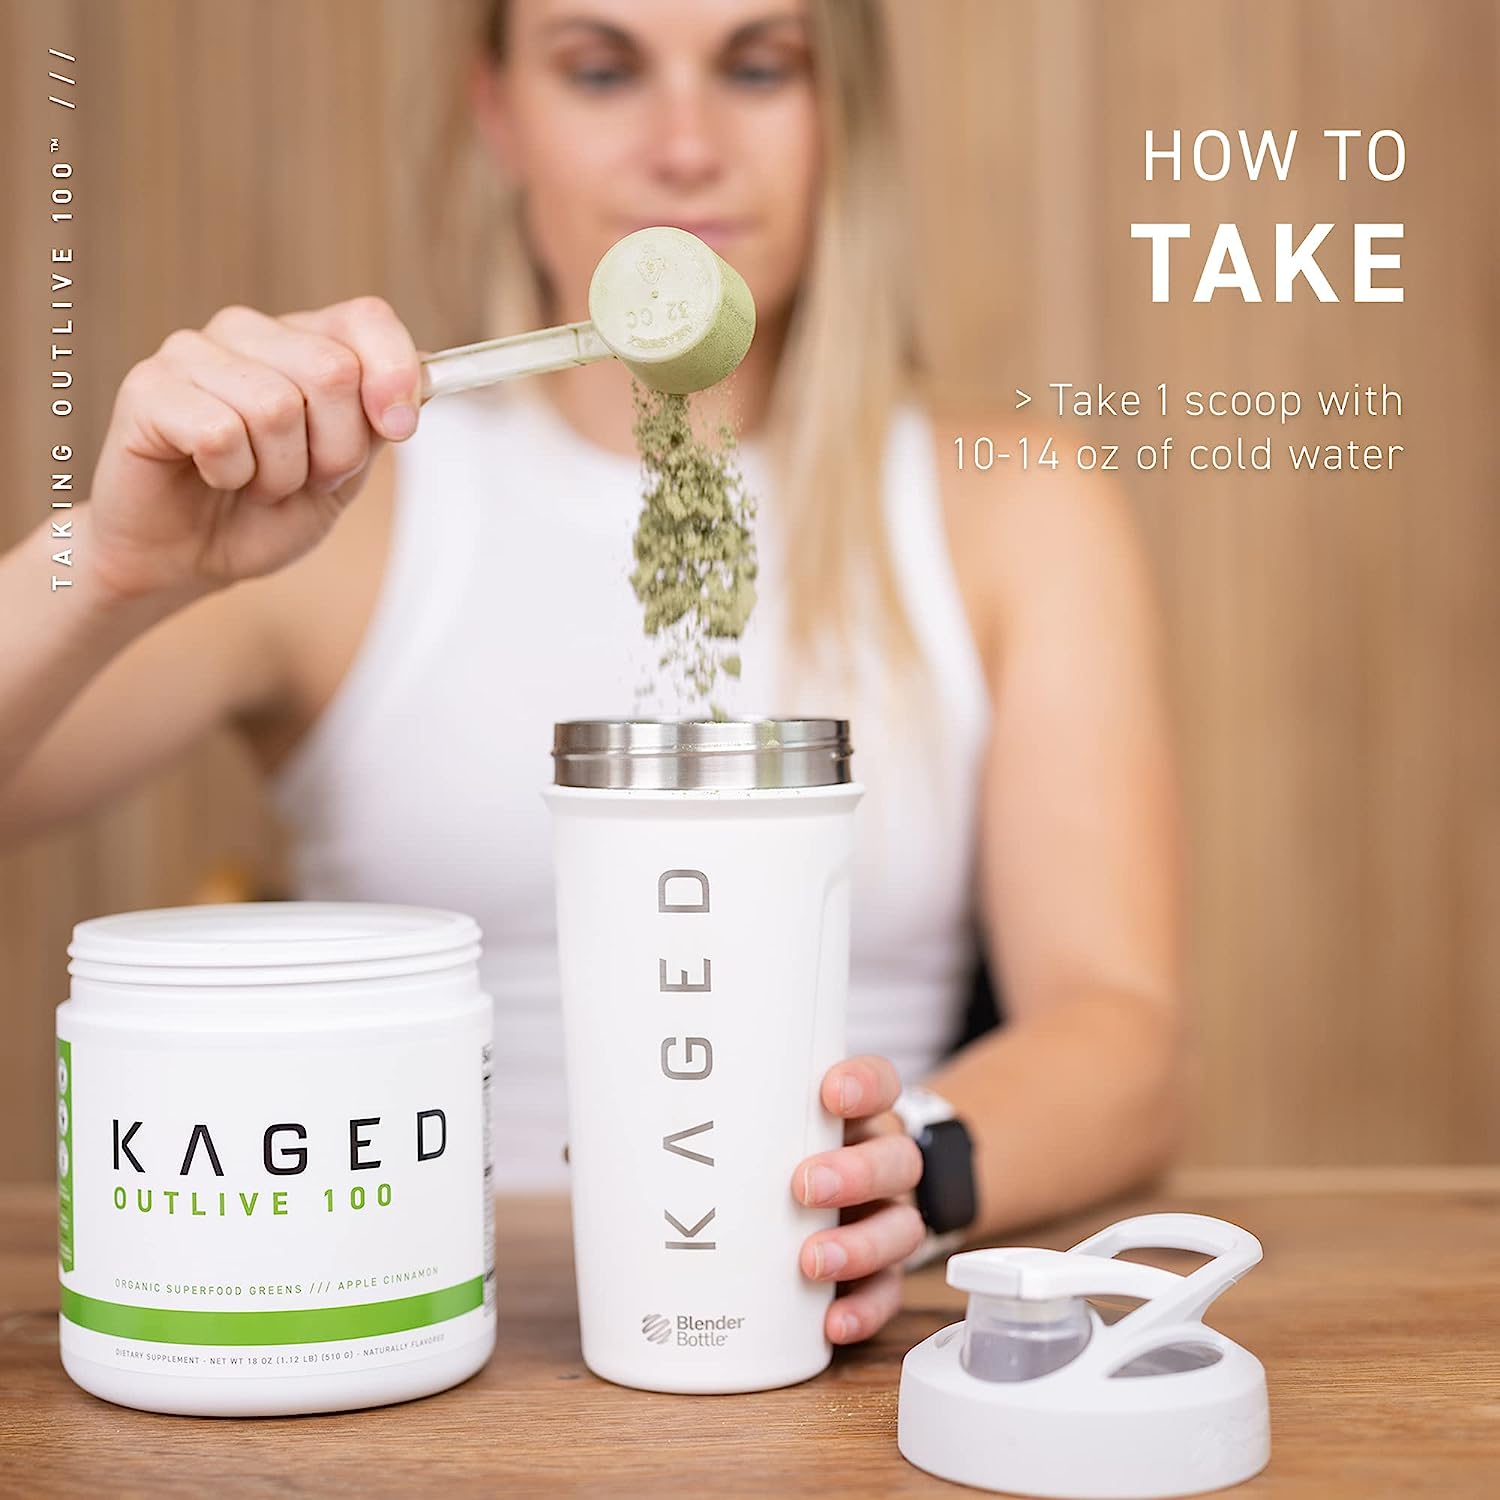 Kaged Outlive 100 | Organic Superfoods | Greens Powder Review